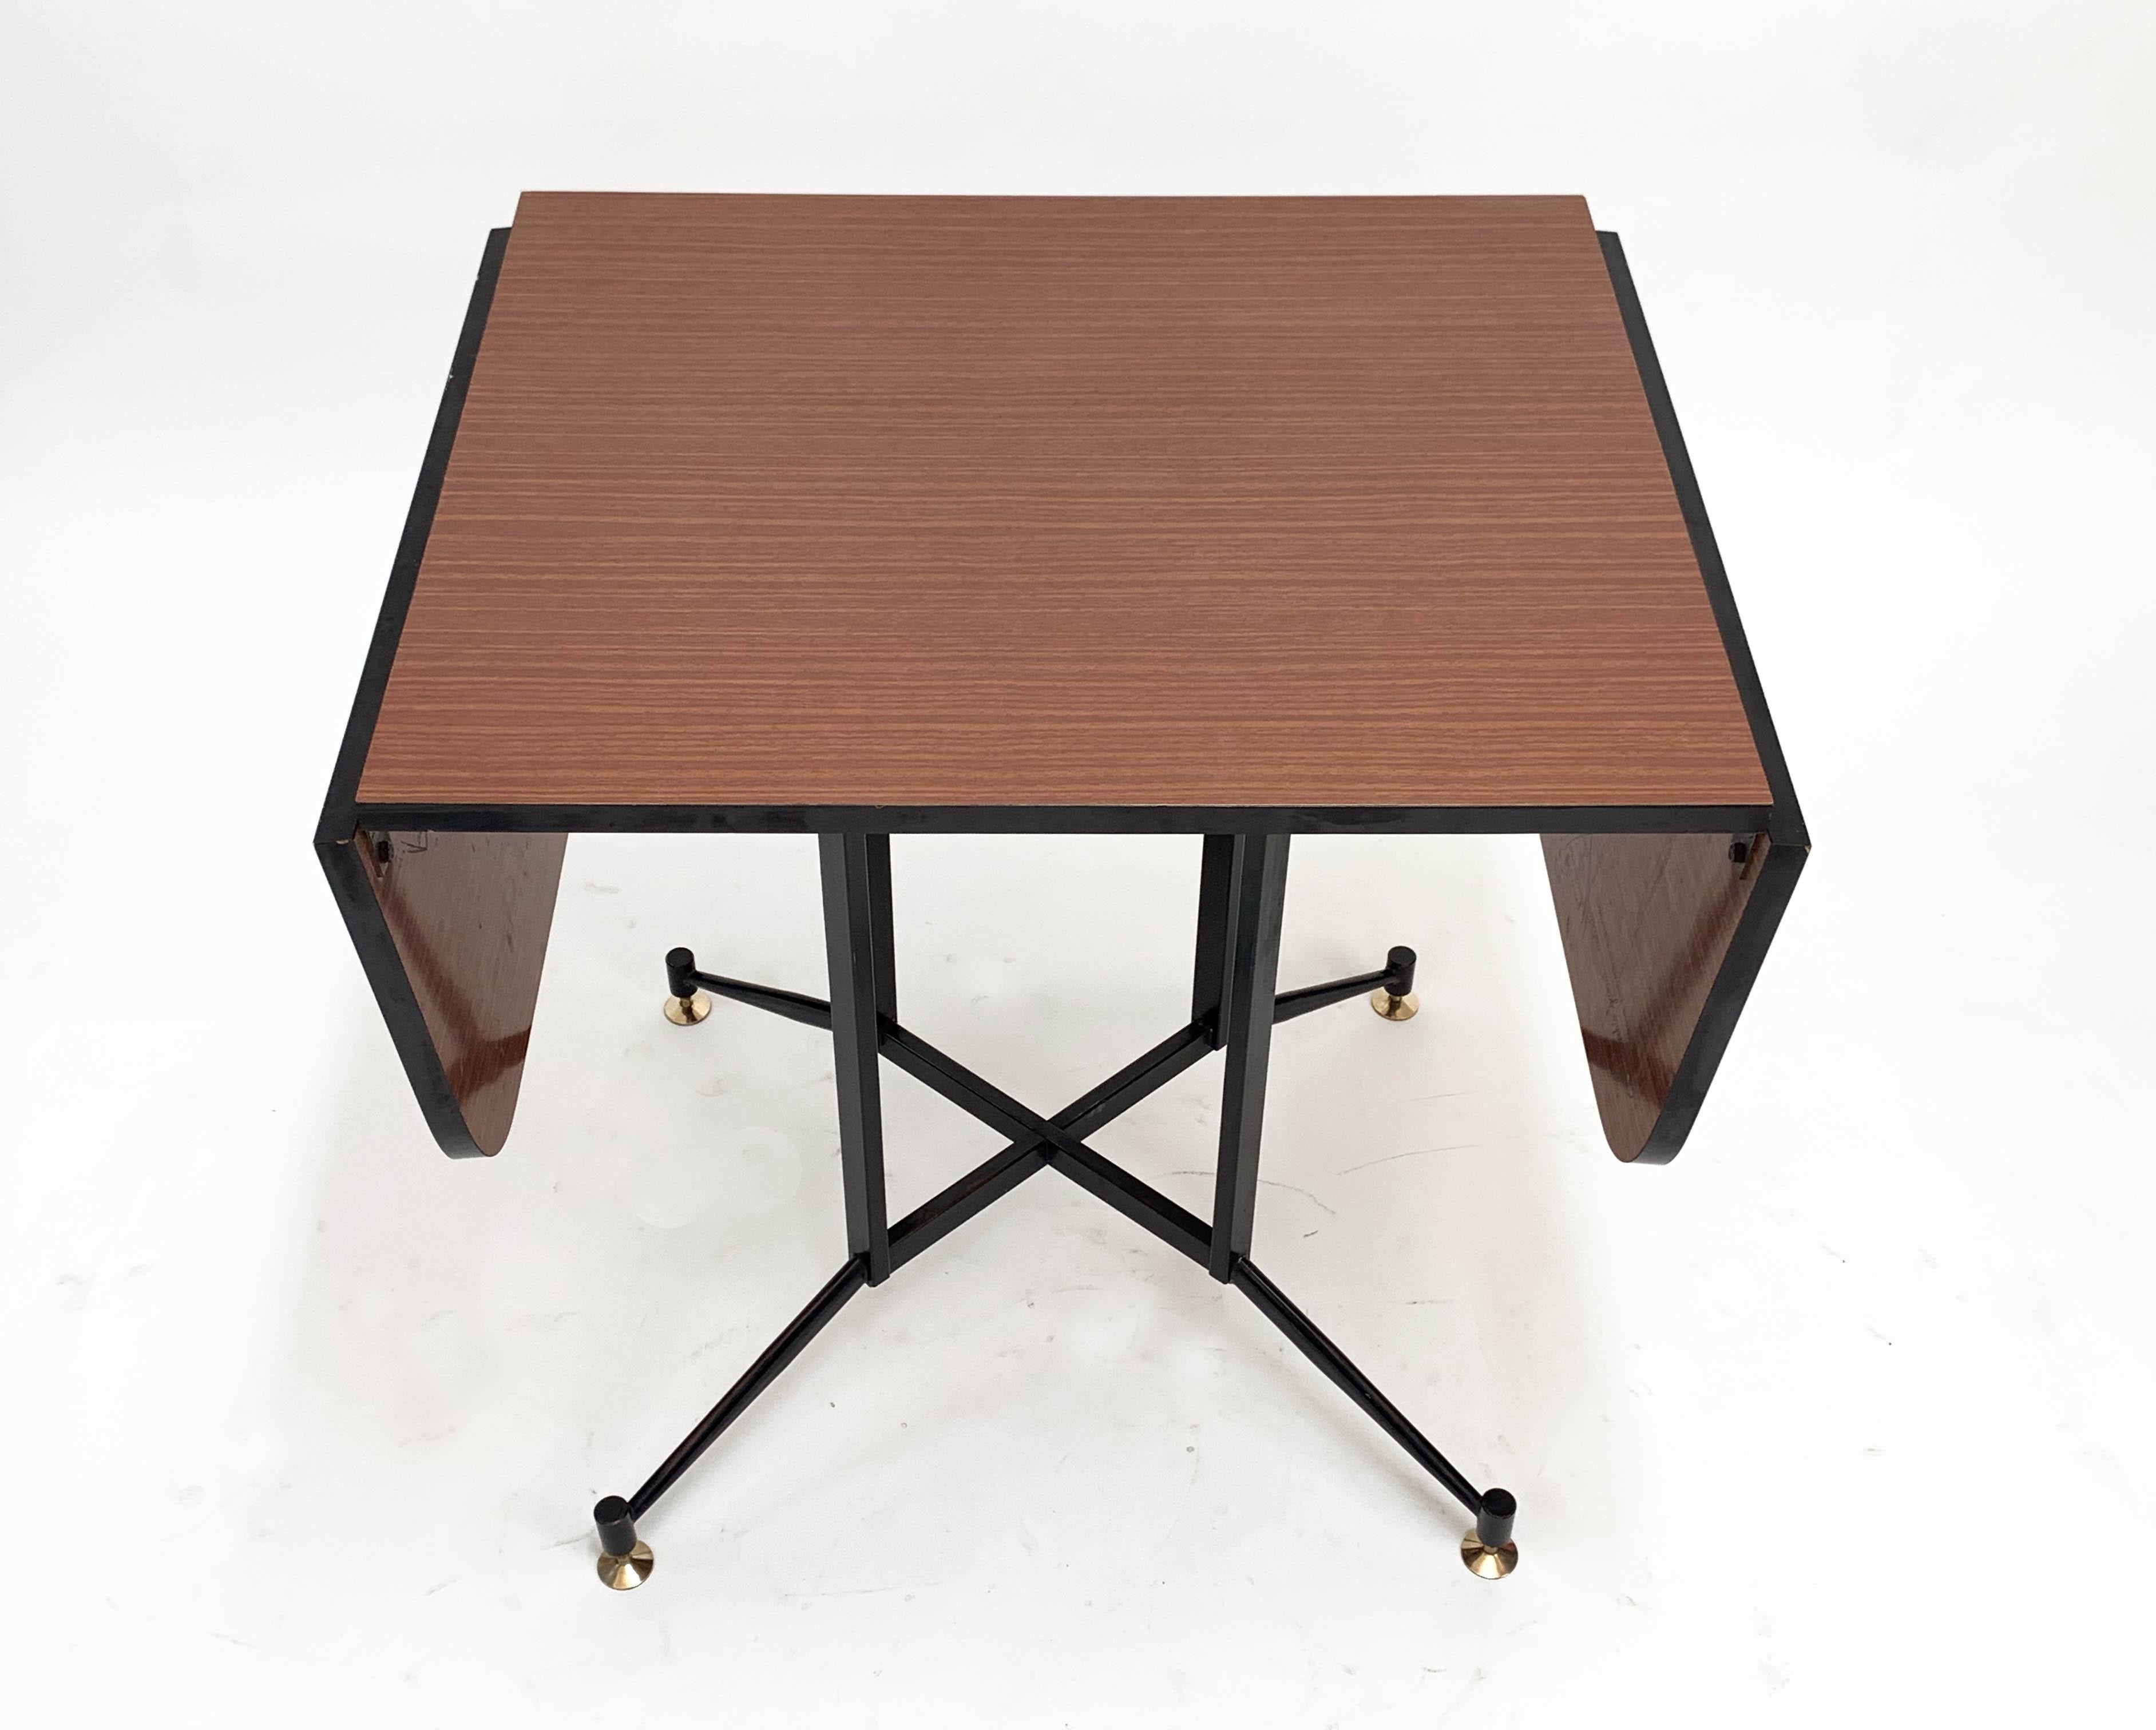 Gardella Midcentury Formica Steel and Brass Table, Laminati Plastici Italy 1950s For Sale 3